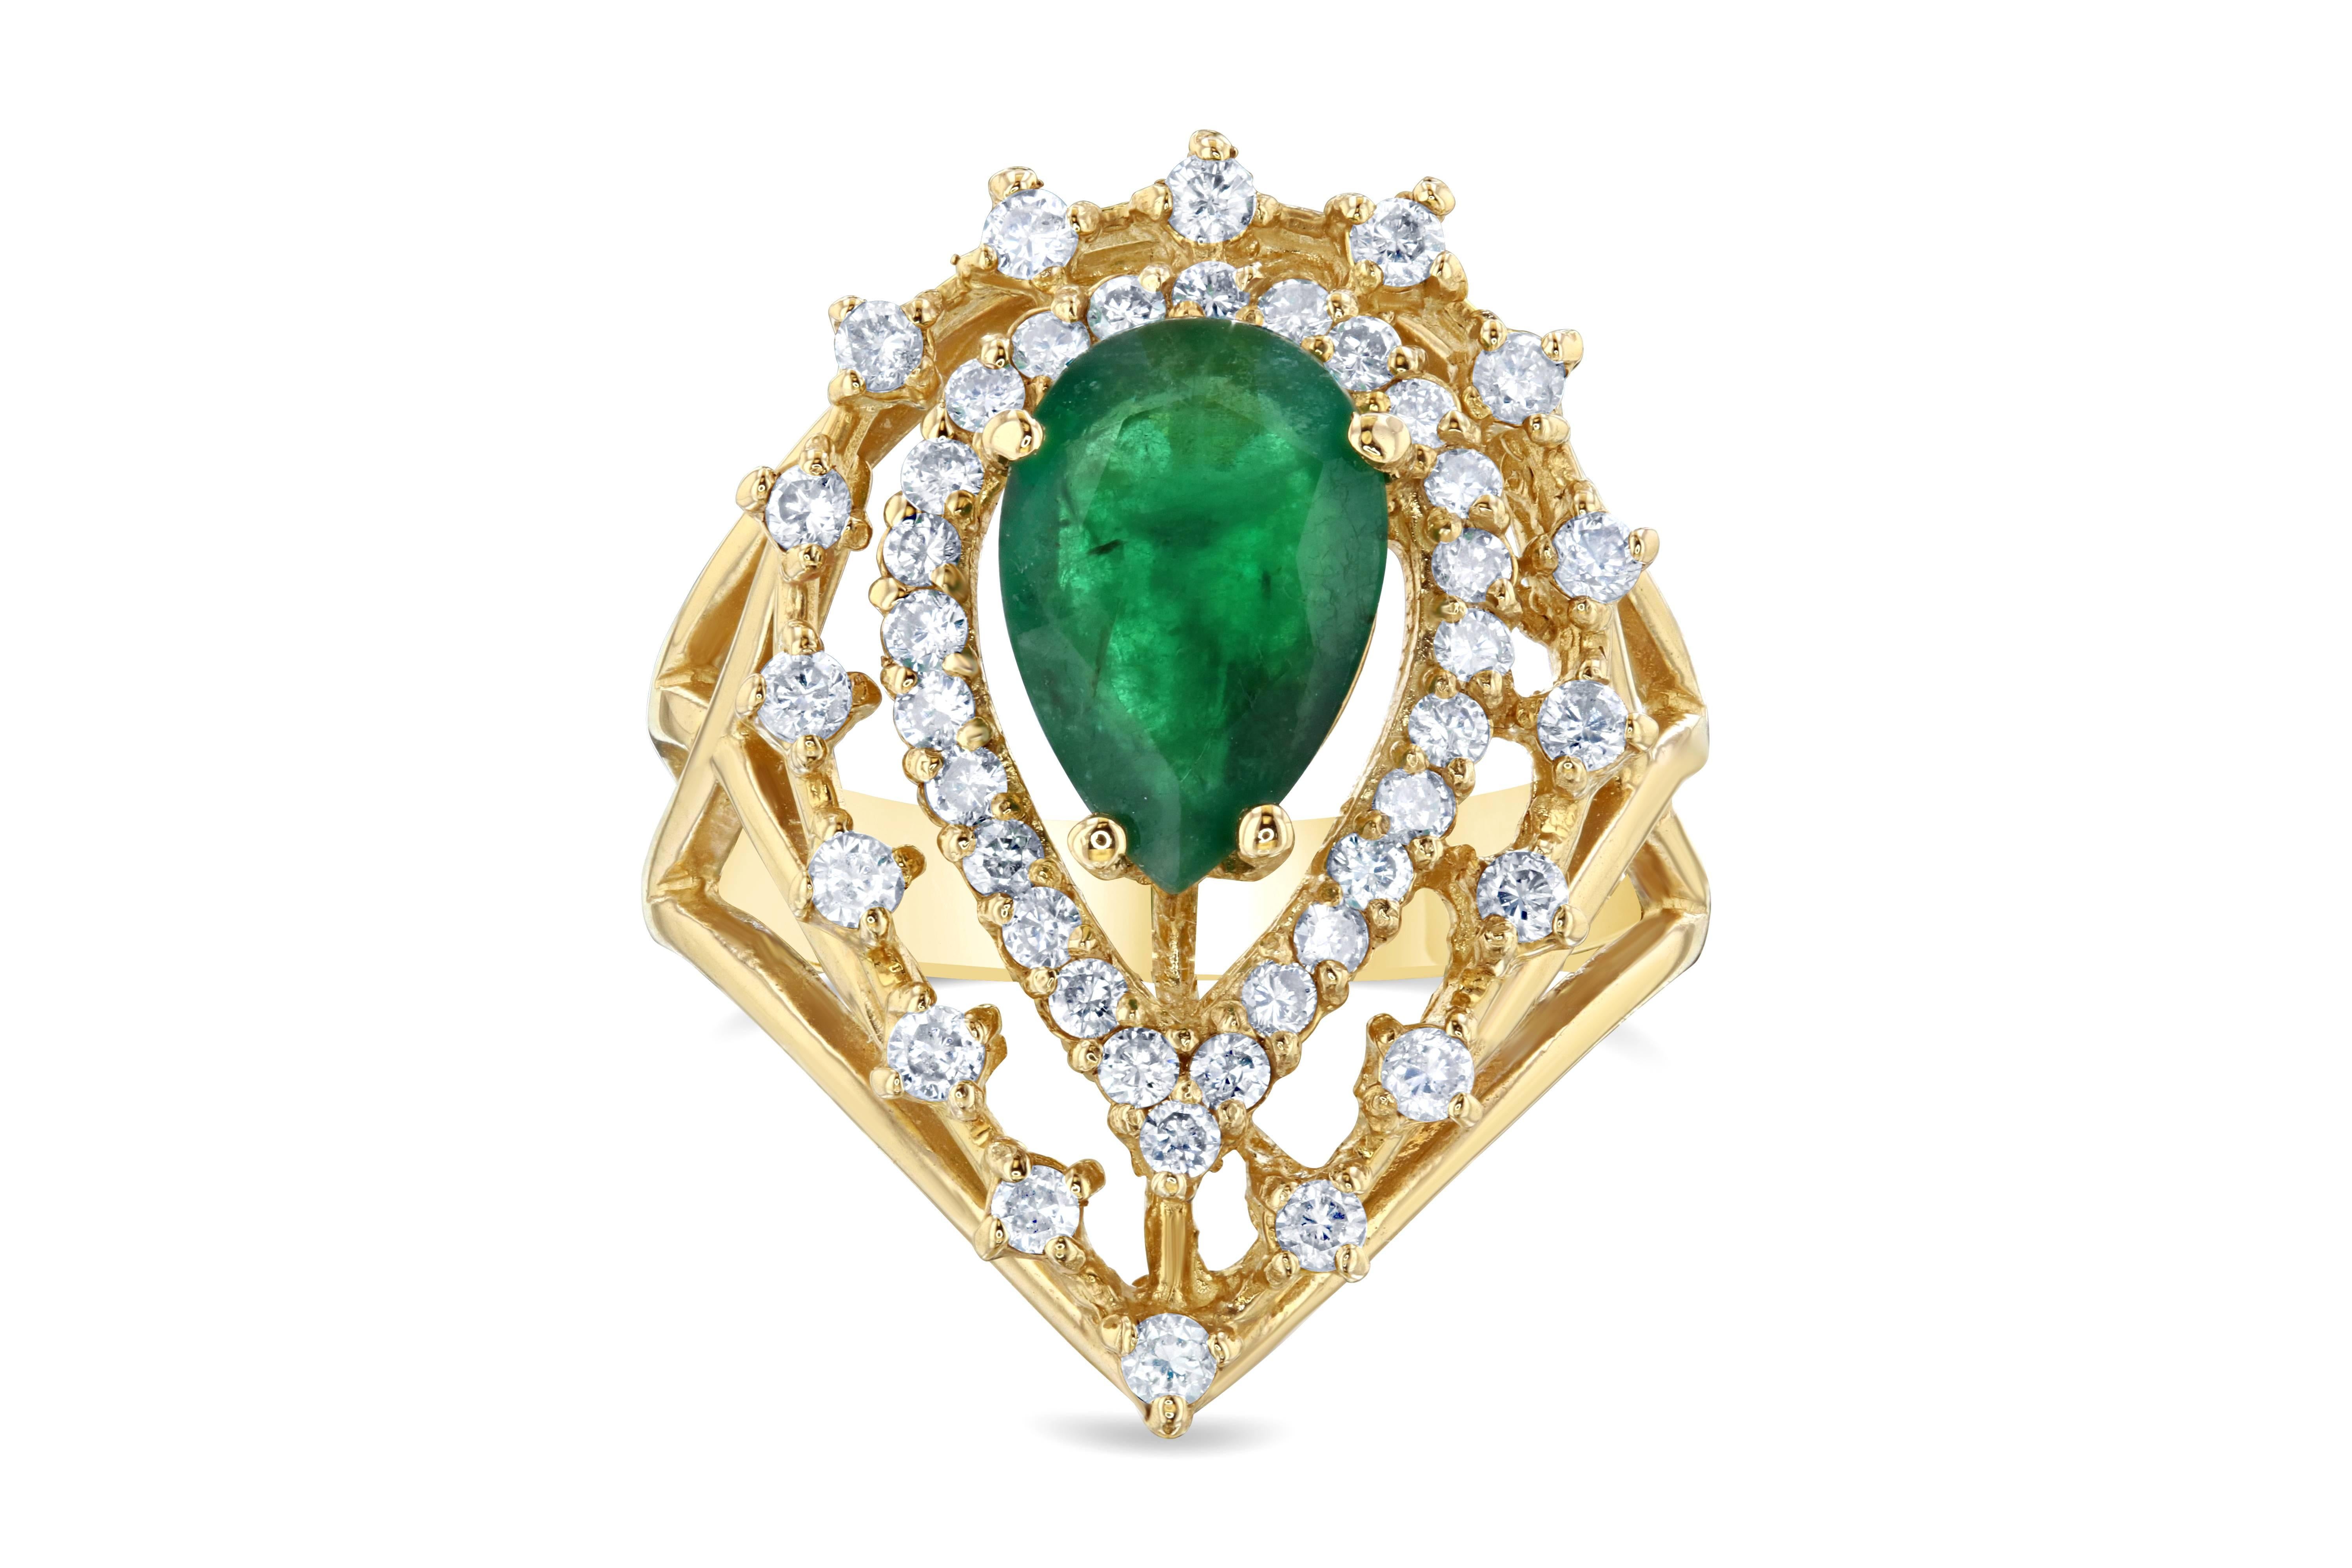 A Simply Stunning work of Art! 
This Victorian-Inspired ring has a center pear cut Emerald that weighs 1.63 Carats with 42 Round Cut Diamonds beautifully placed around the setting weighing 0.63 Carats. The Total Carat Weight of the ring is 2.26